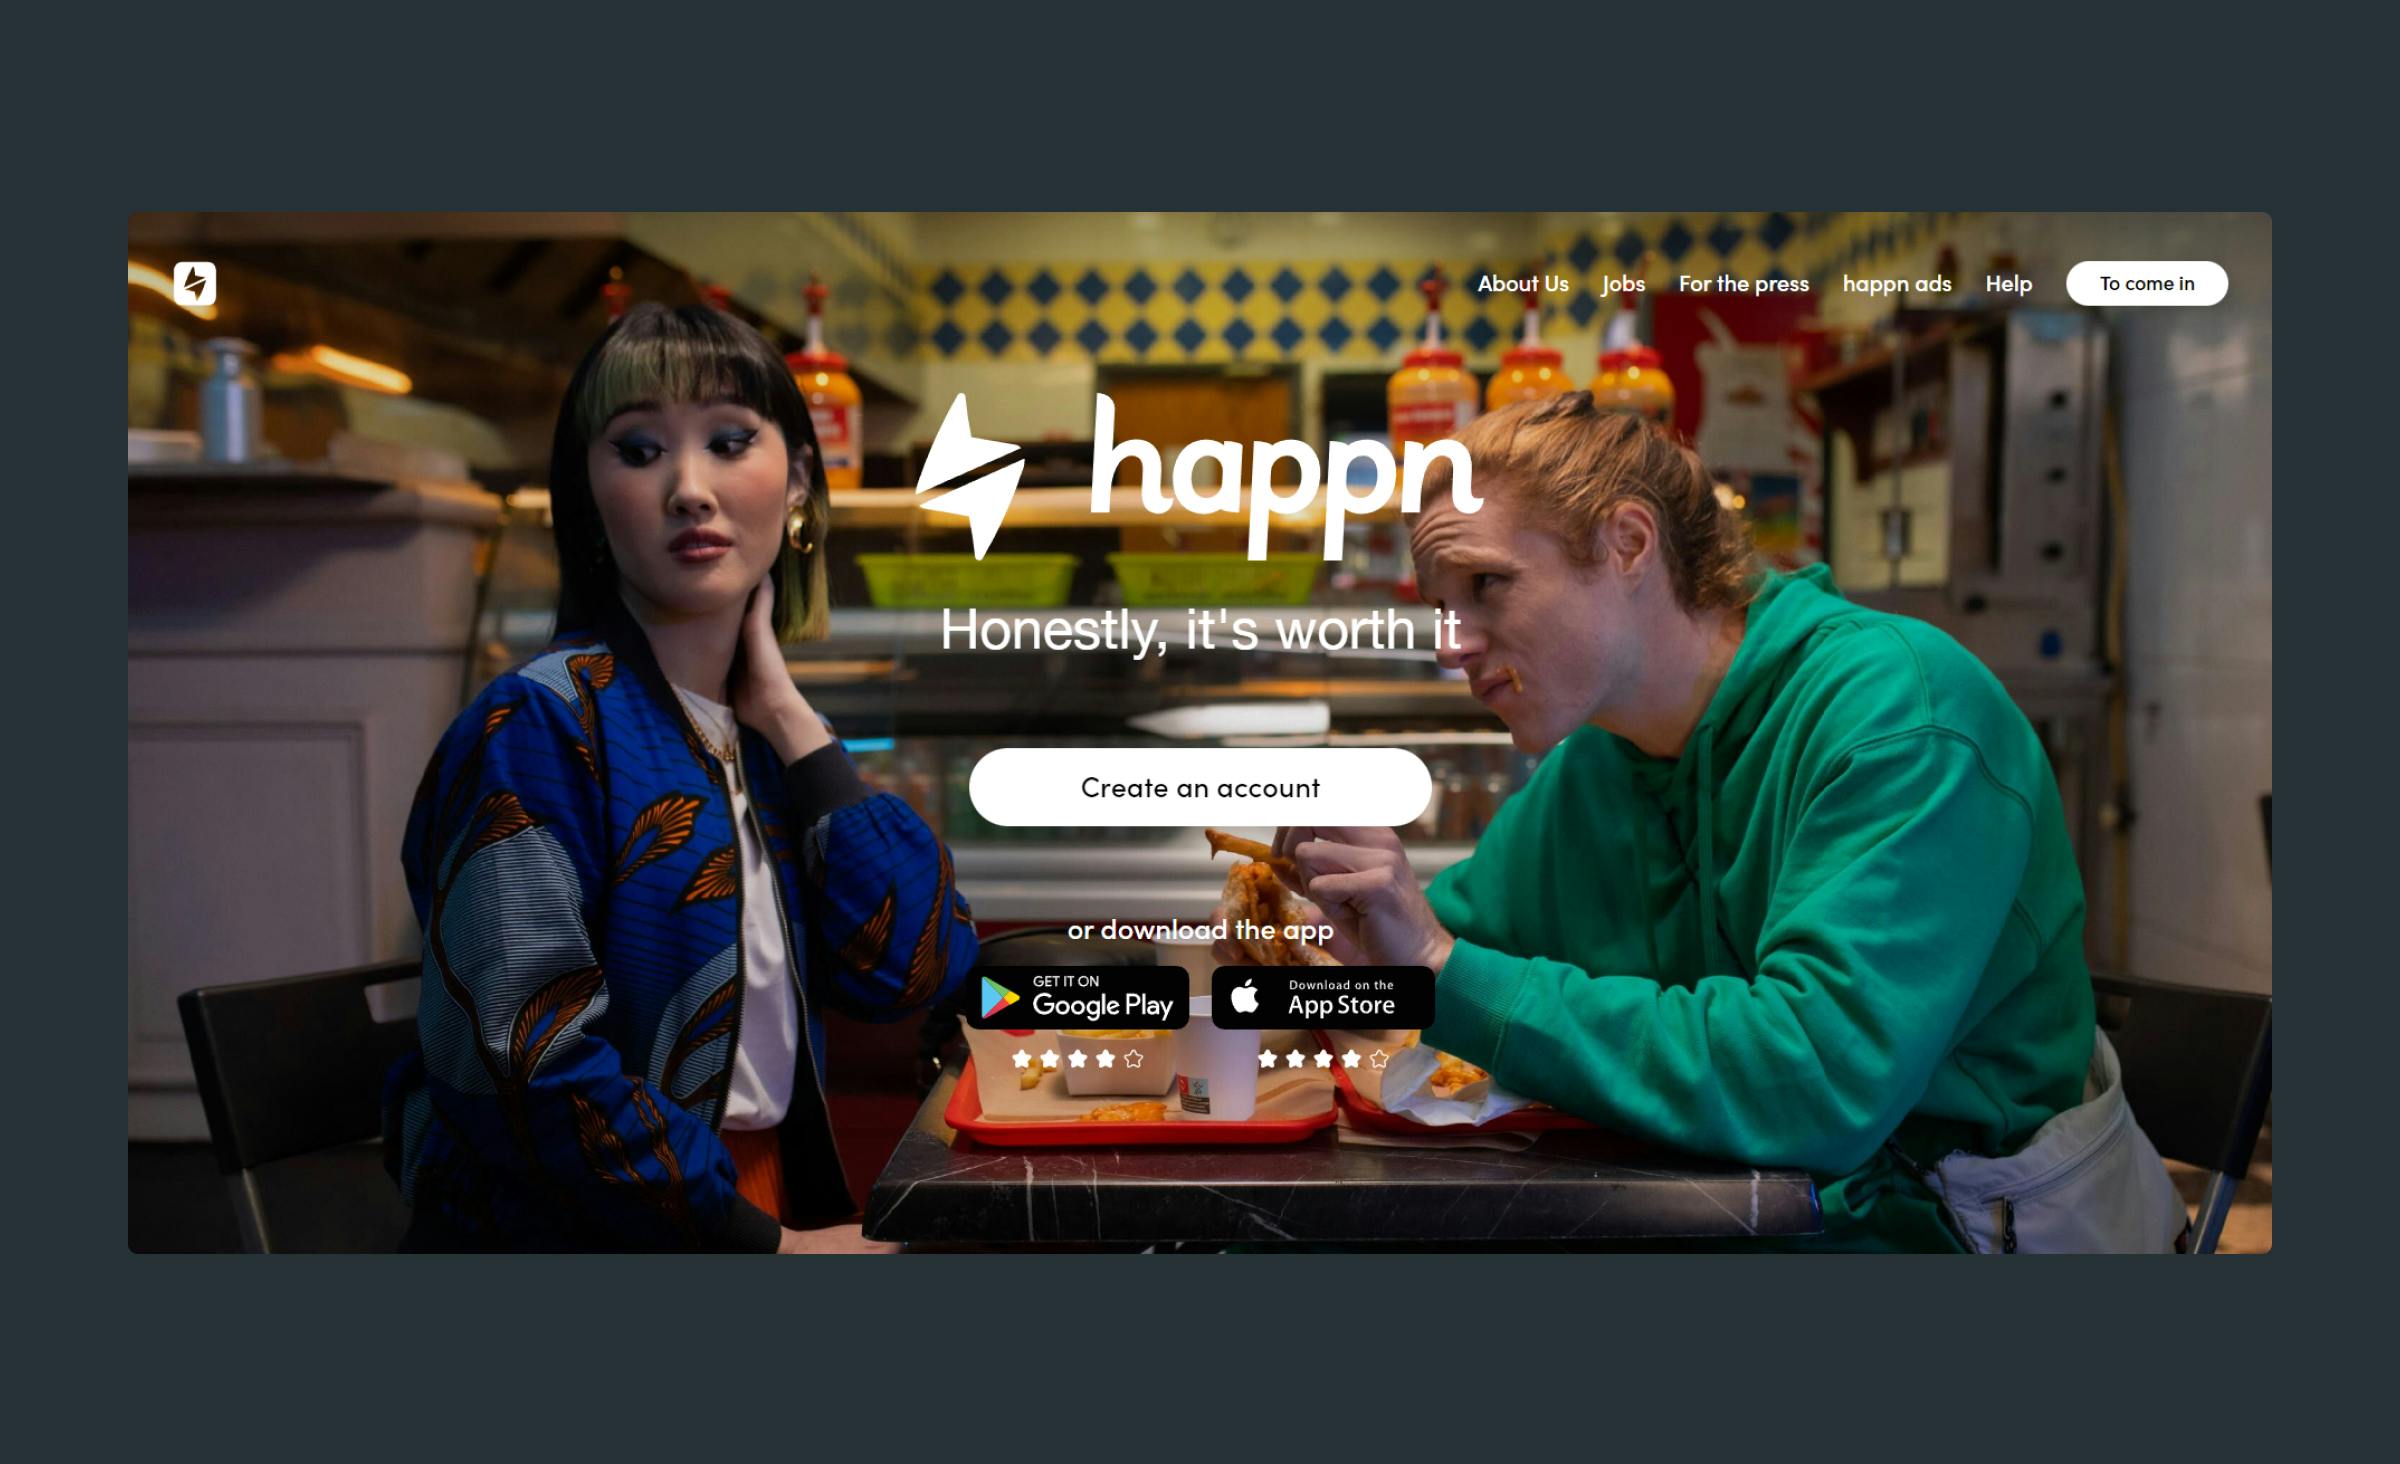 You can build a social media website to promote your social network like Happn does